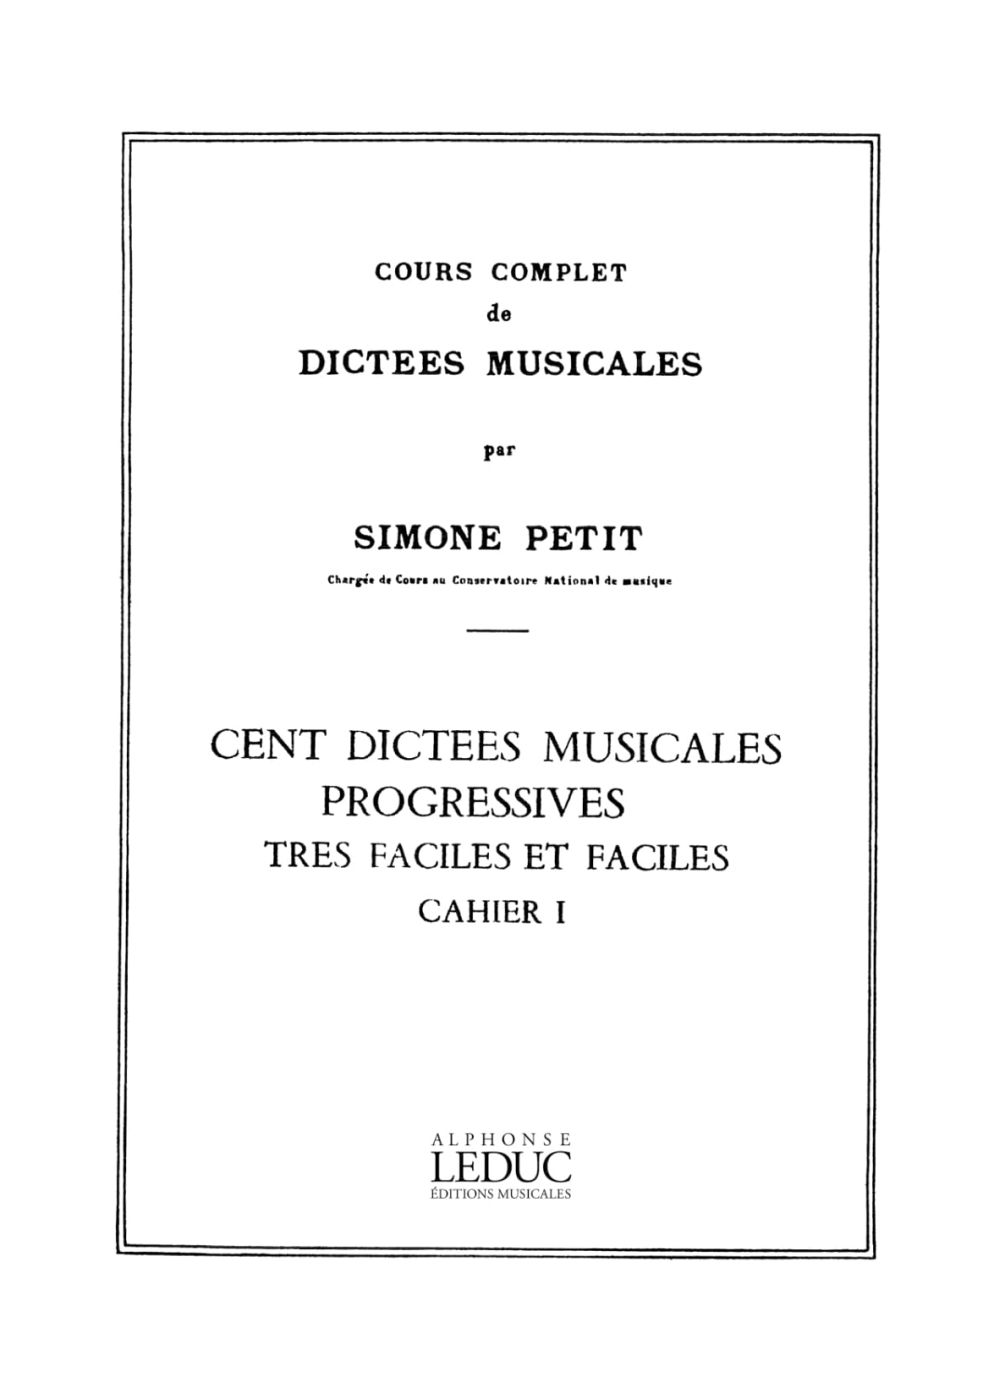 S Petit: Cours Compl.Dictees Musicales Vol.1